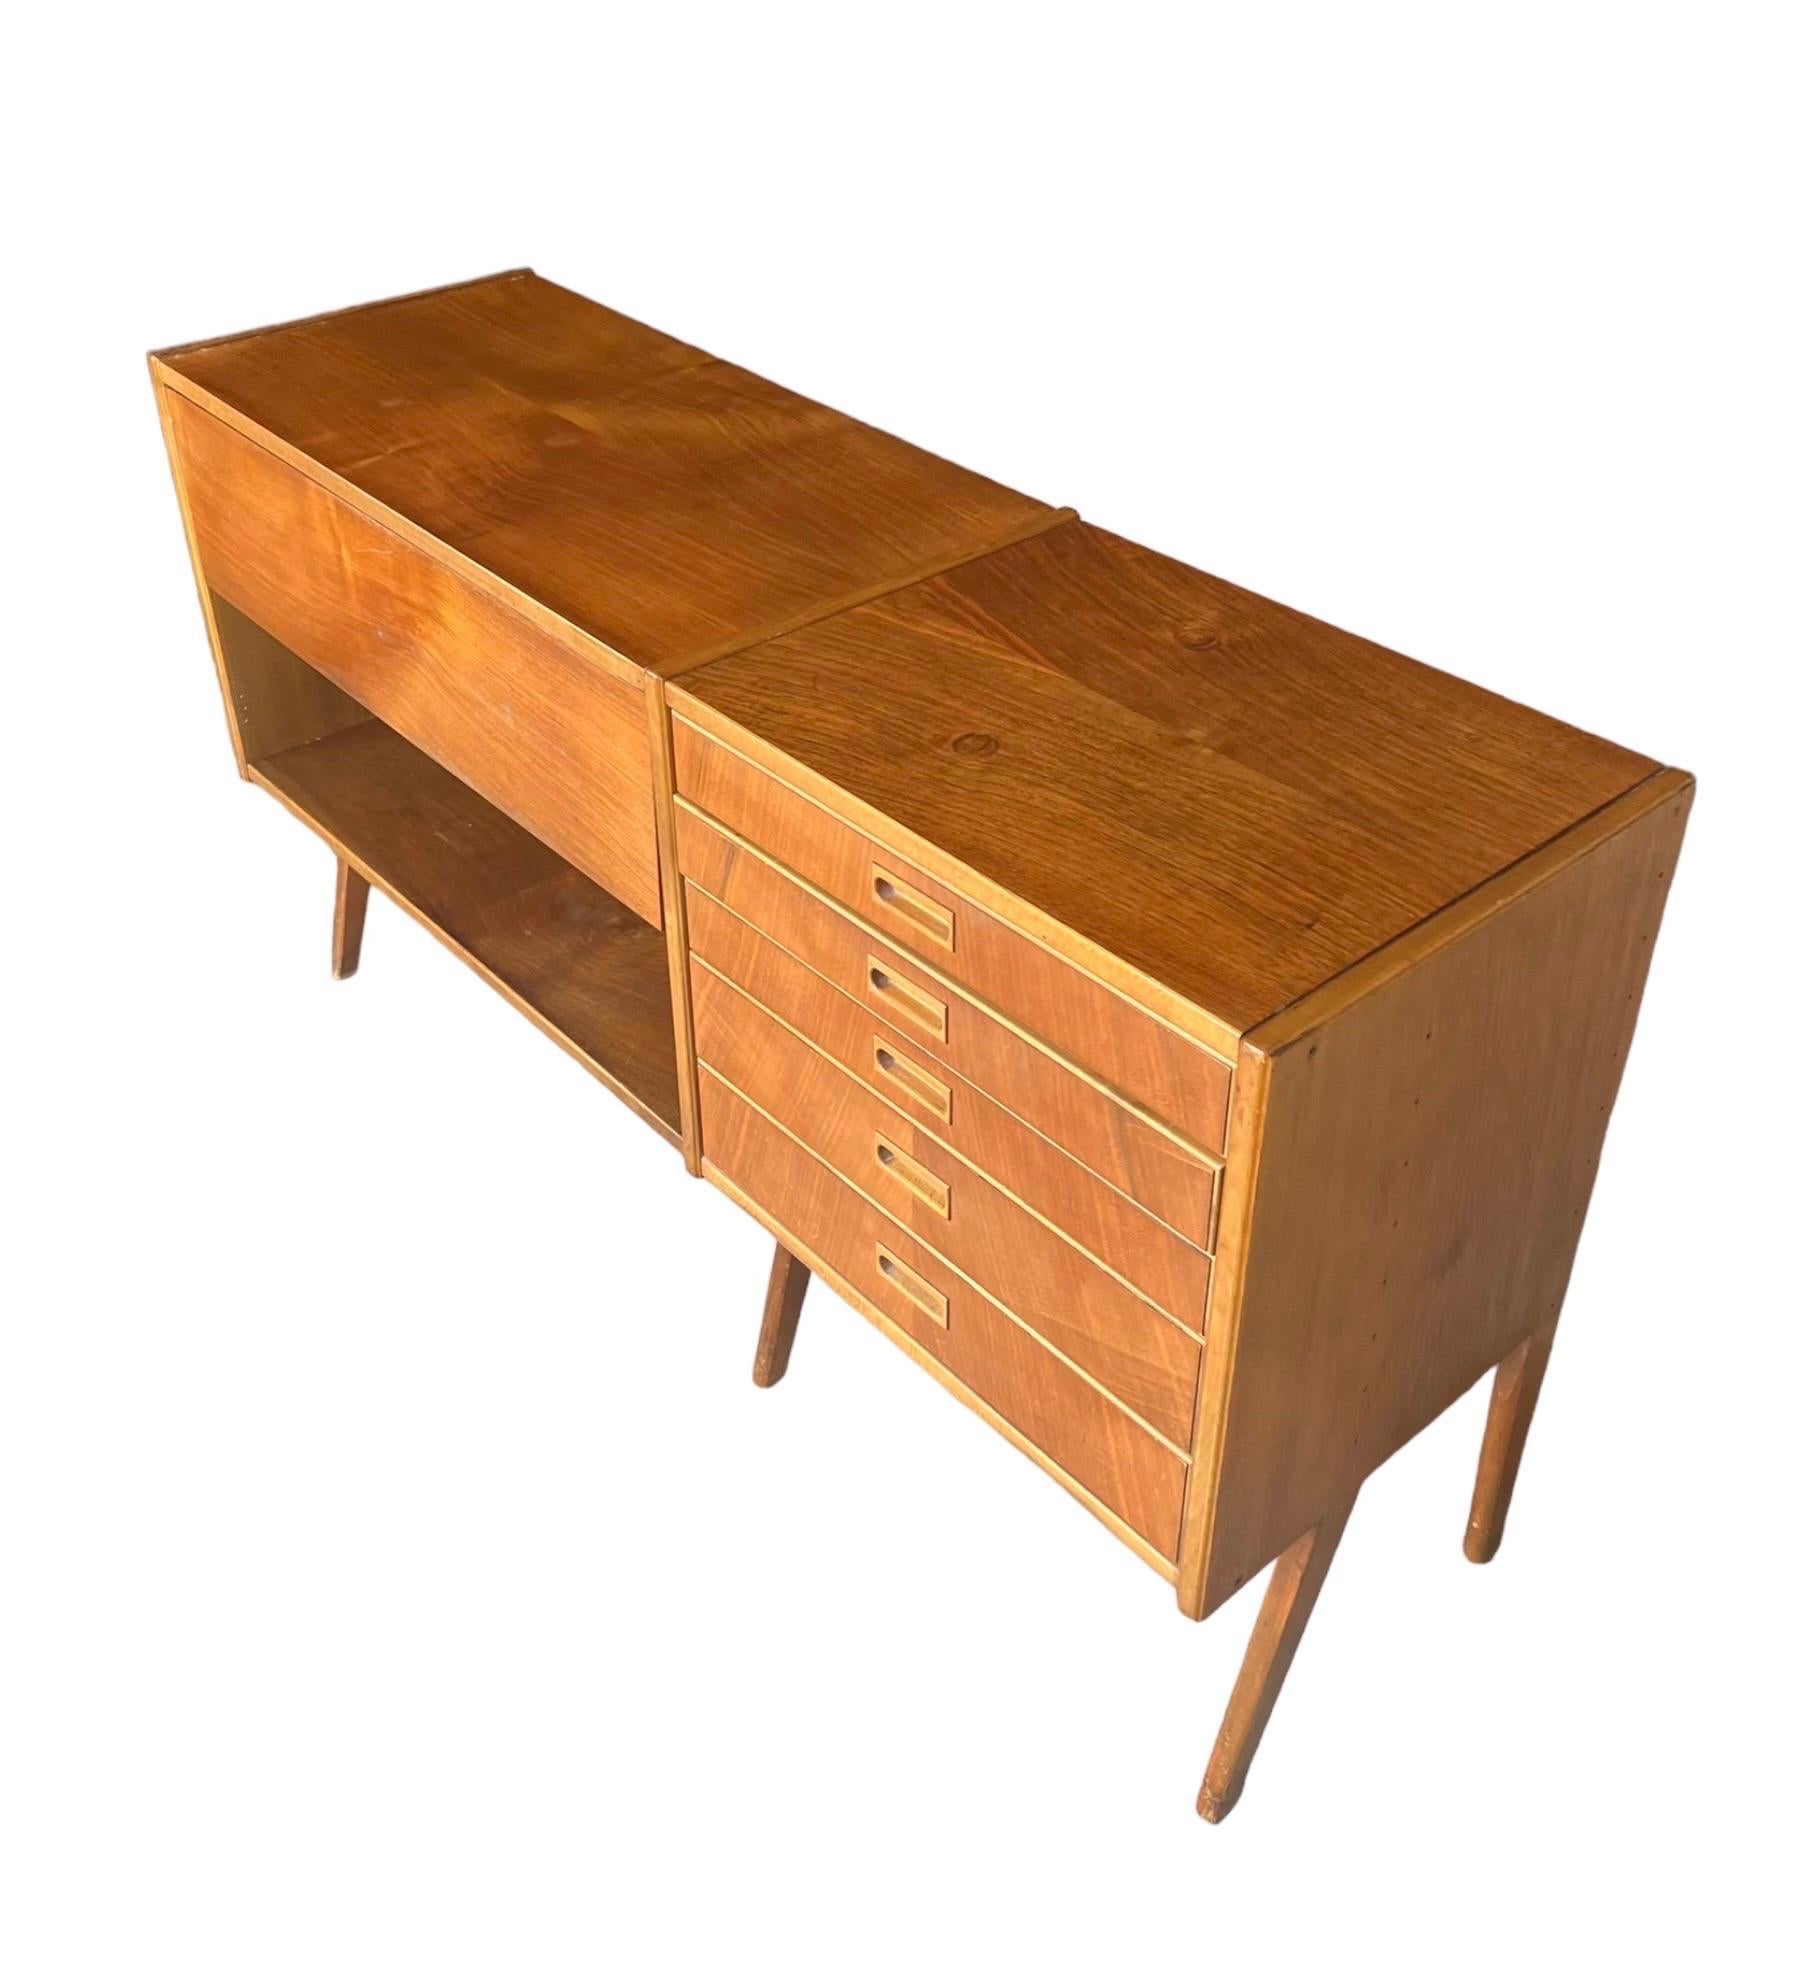 Vintage Mid Century Modern Teak Wood Credenza or Buffet Made in Sweden  In Good Condition For Sale In Seattle, WA